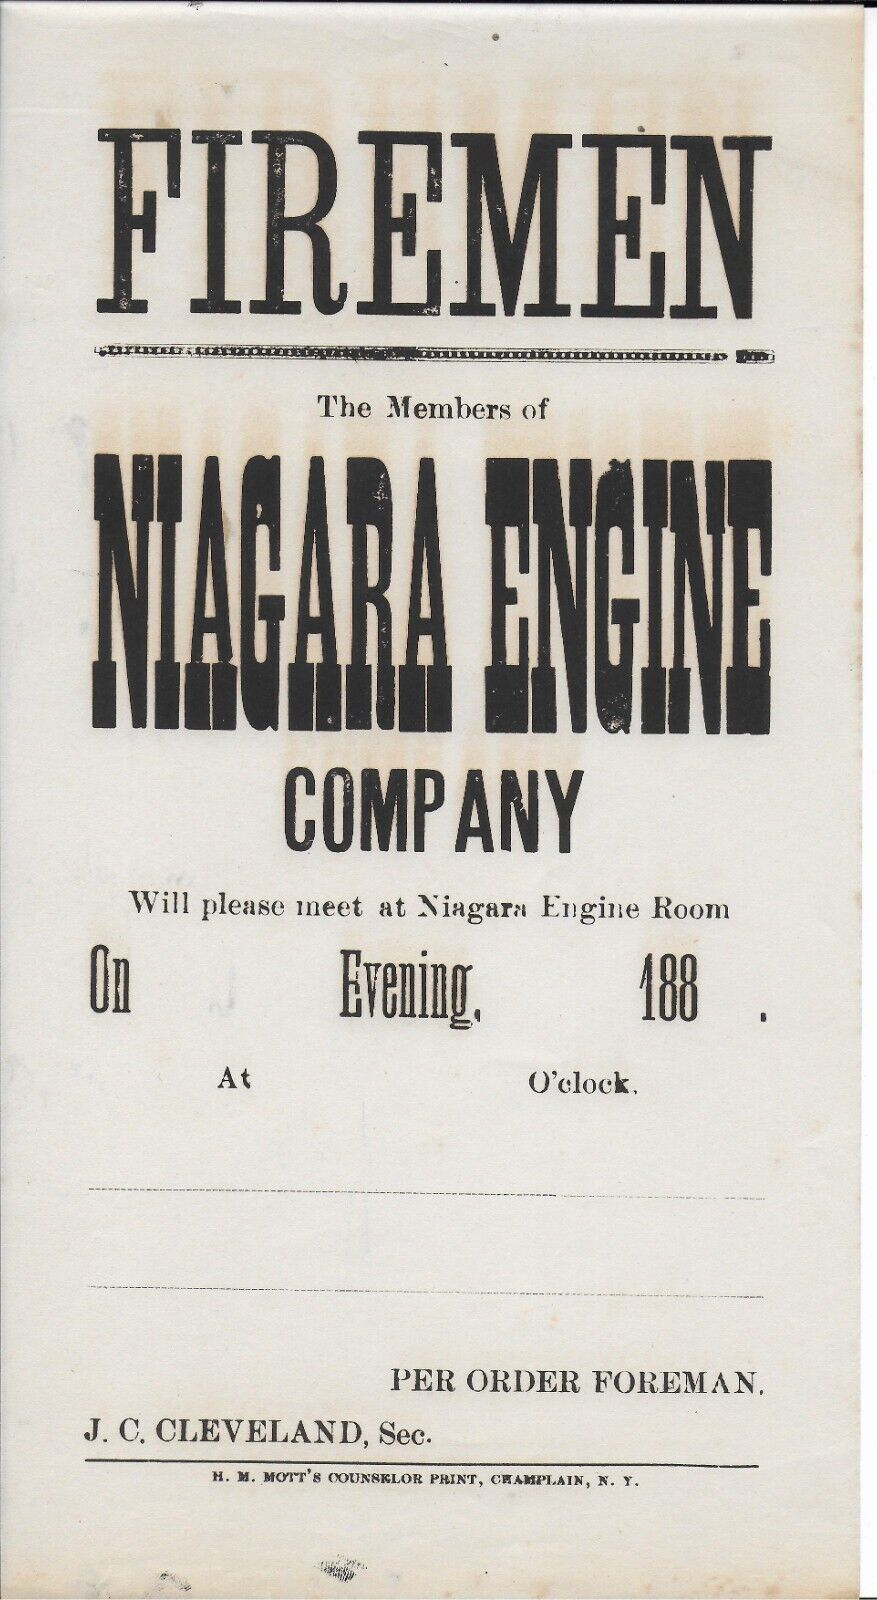 Broadside for a Meeting of the Members of the Niagara Engine Company (NY Firemen